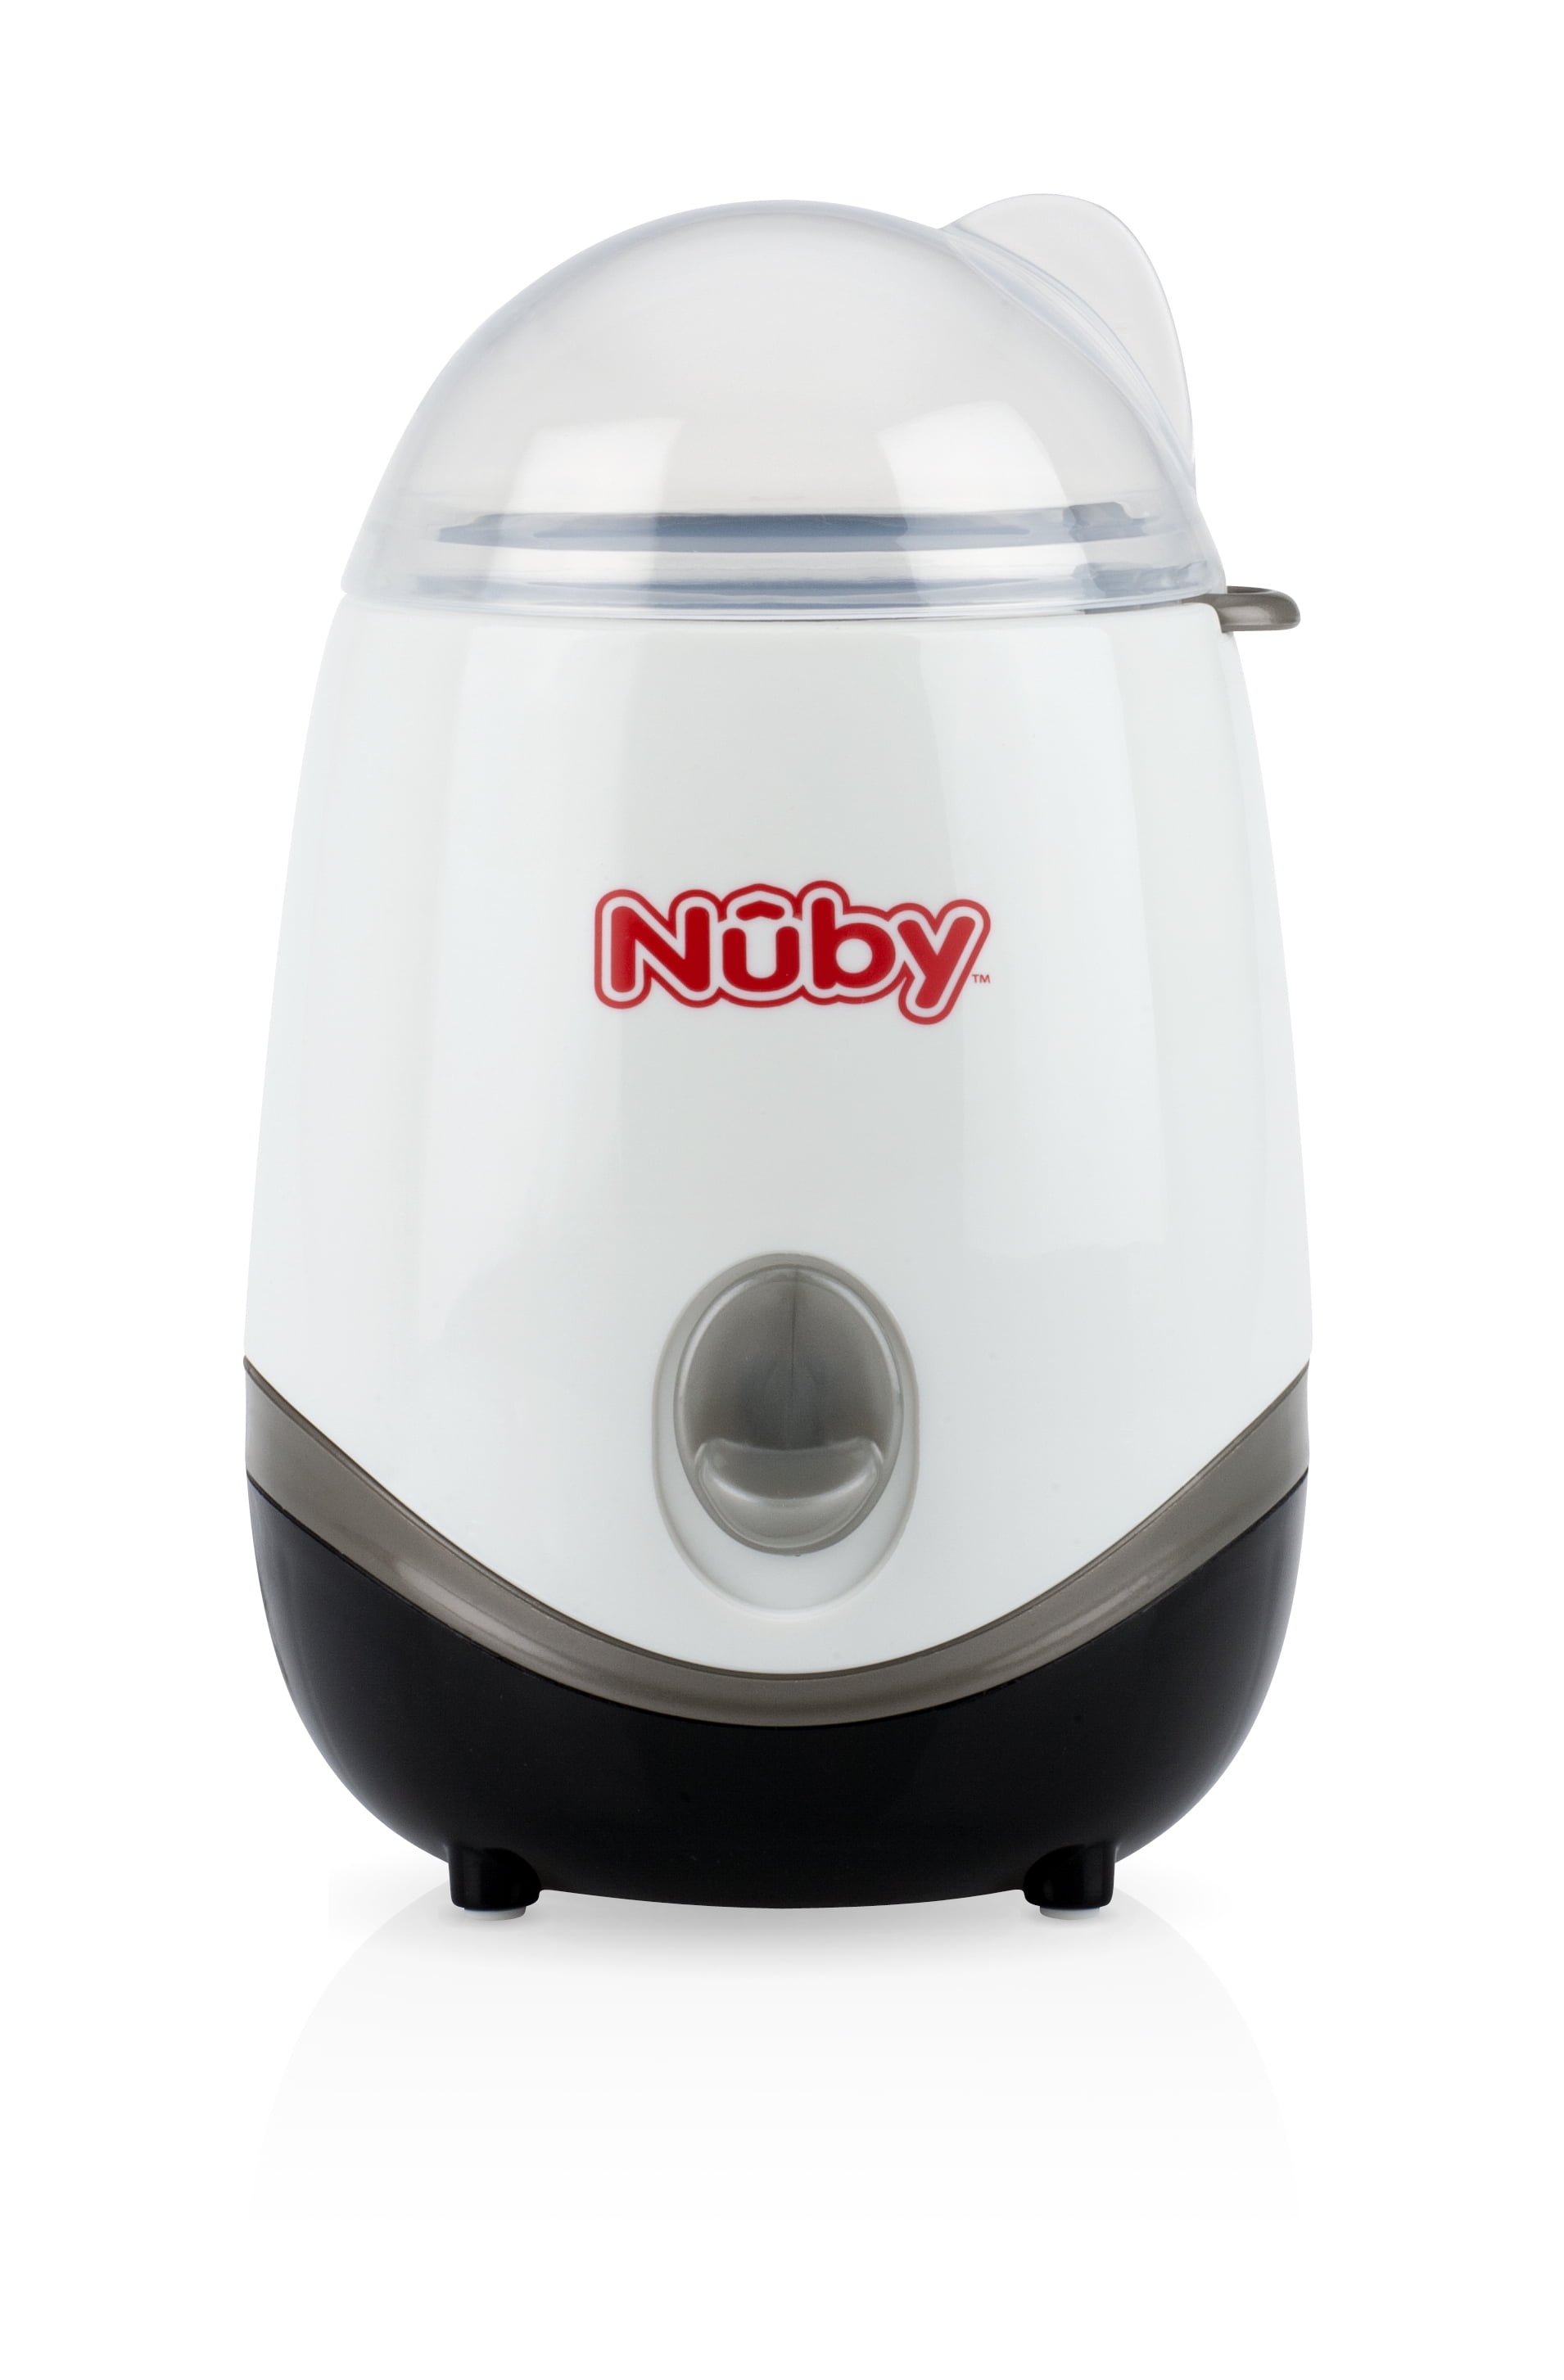 nuby natural touch electric steam steriliser and dryer